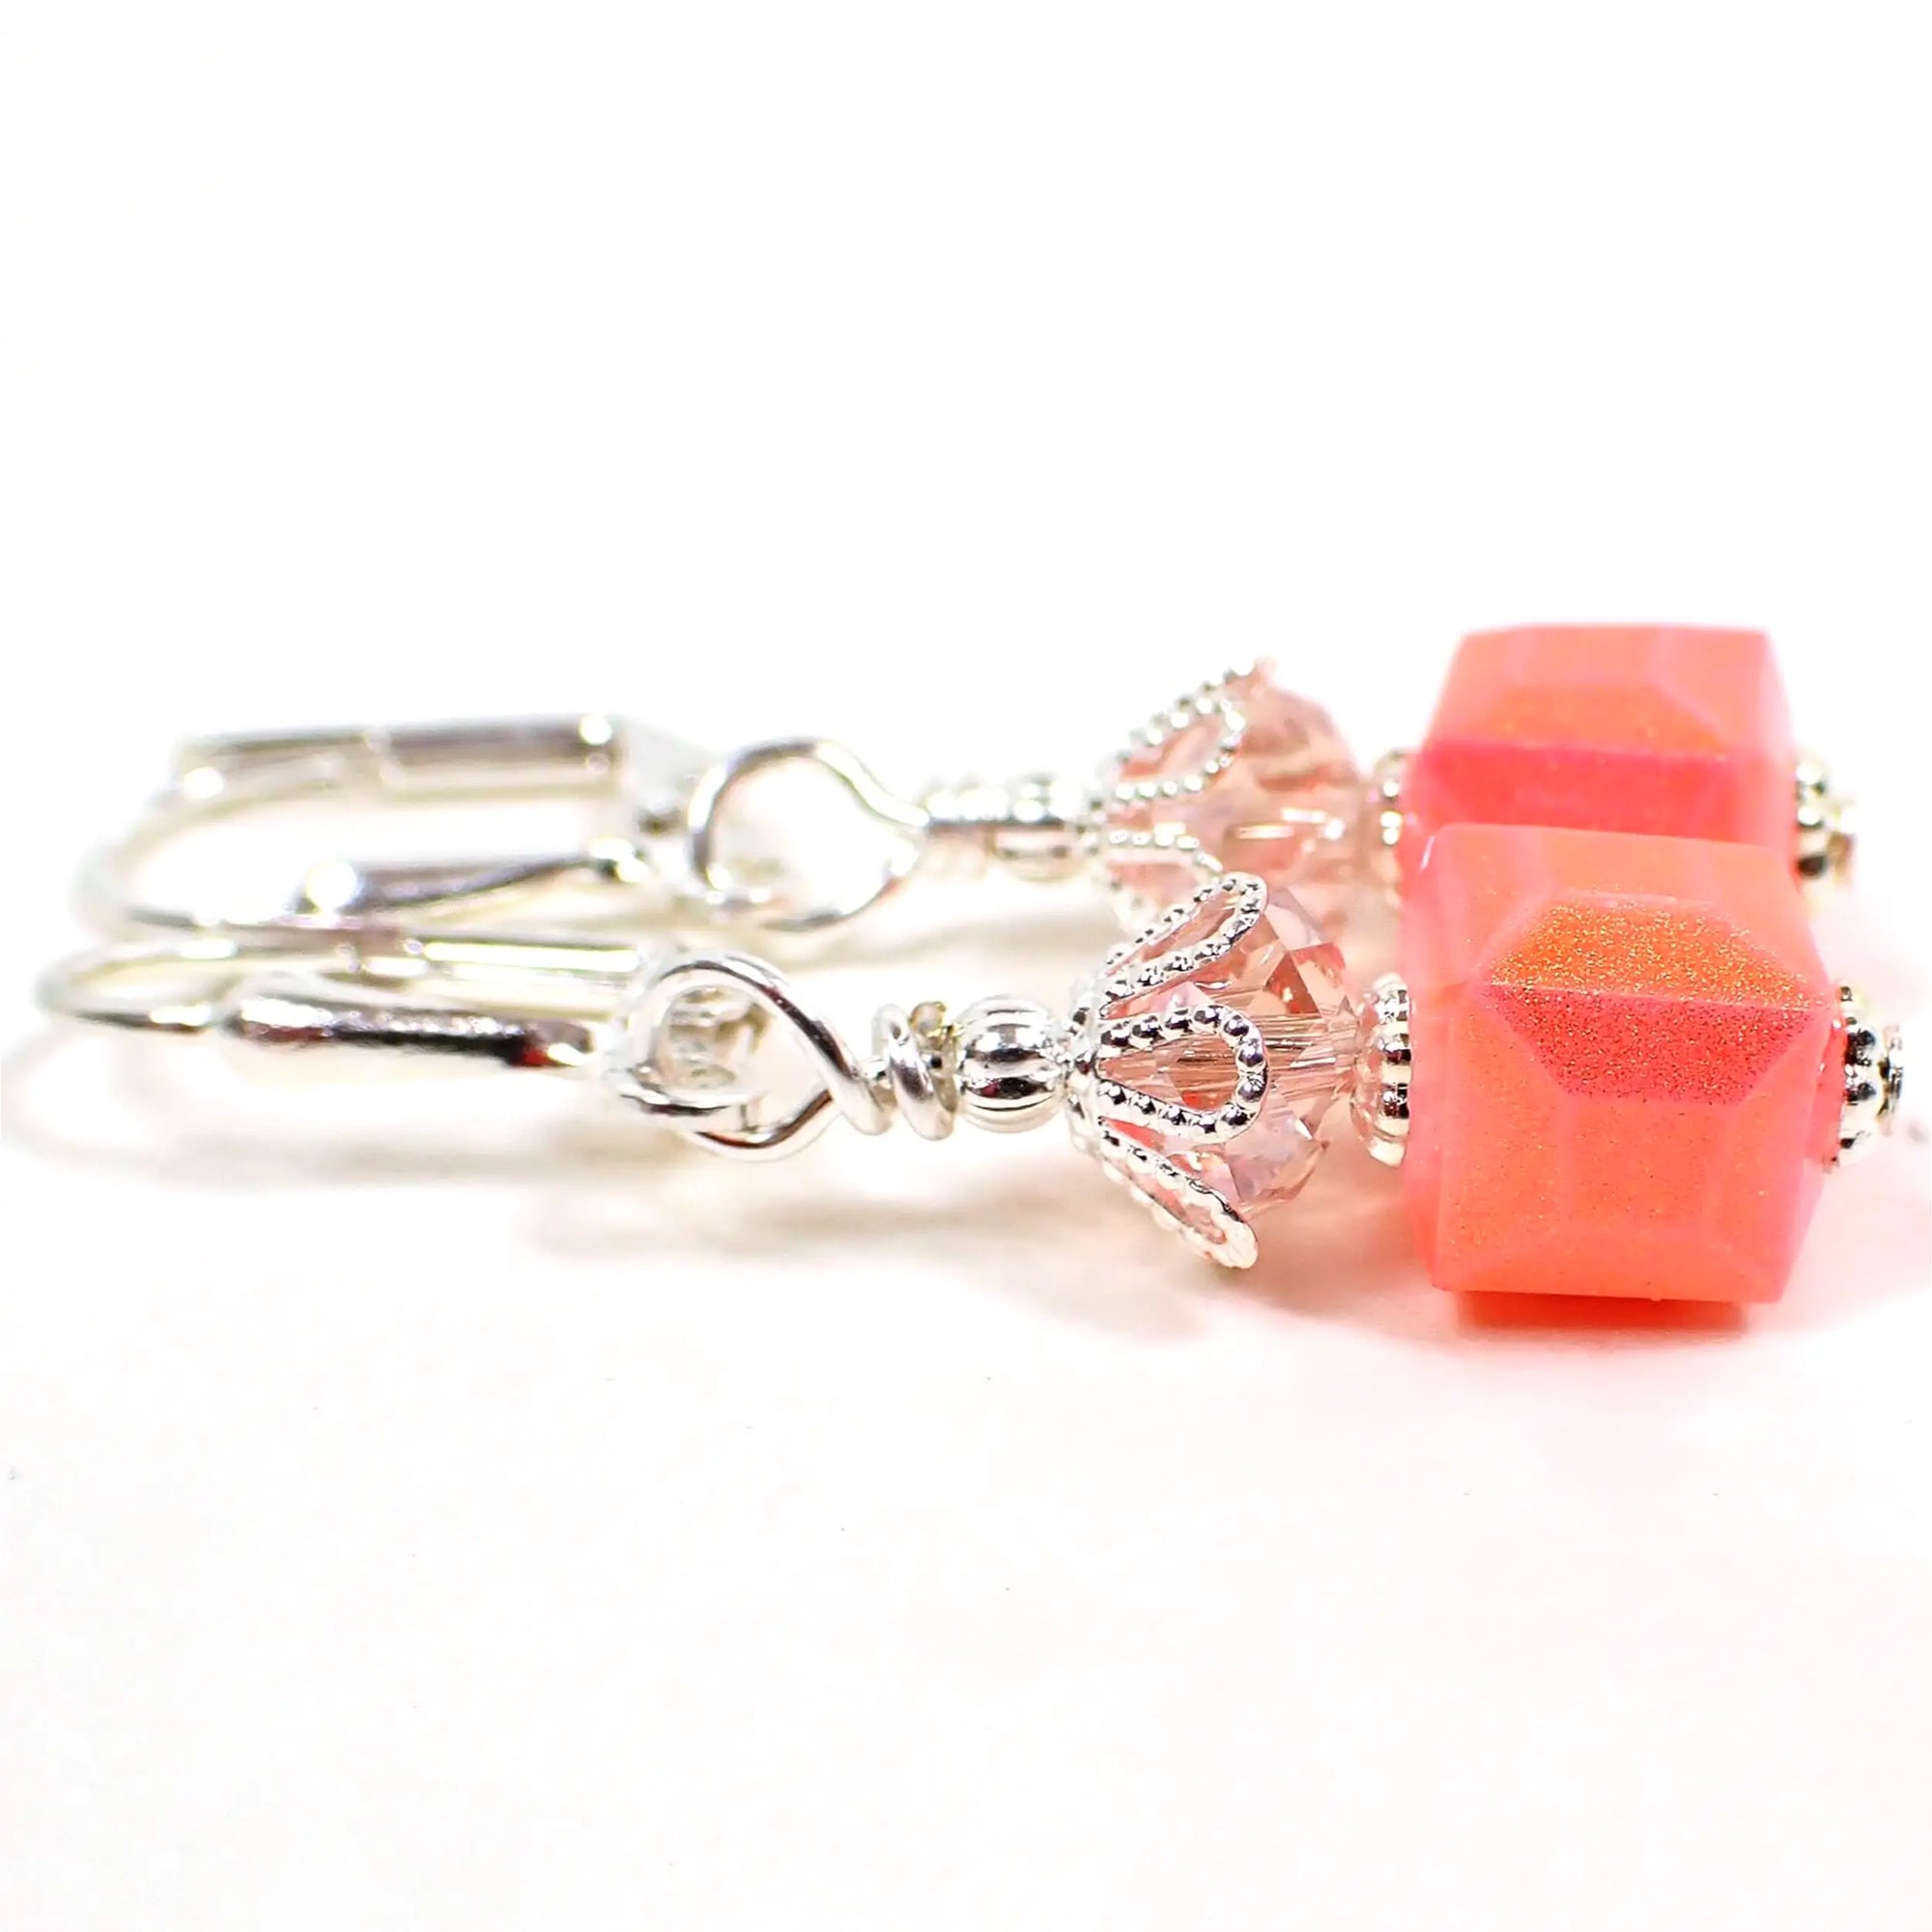 Side view of the small handmade cube earrings. The metal is silver plated in color. There are light pink faceted glass crystal beads at the top. The bottom beads are square cube shaped and have a bright pink color with a sparkly golden sheen on the outside.